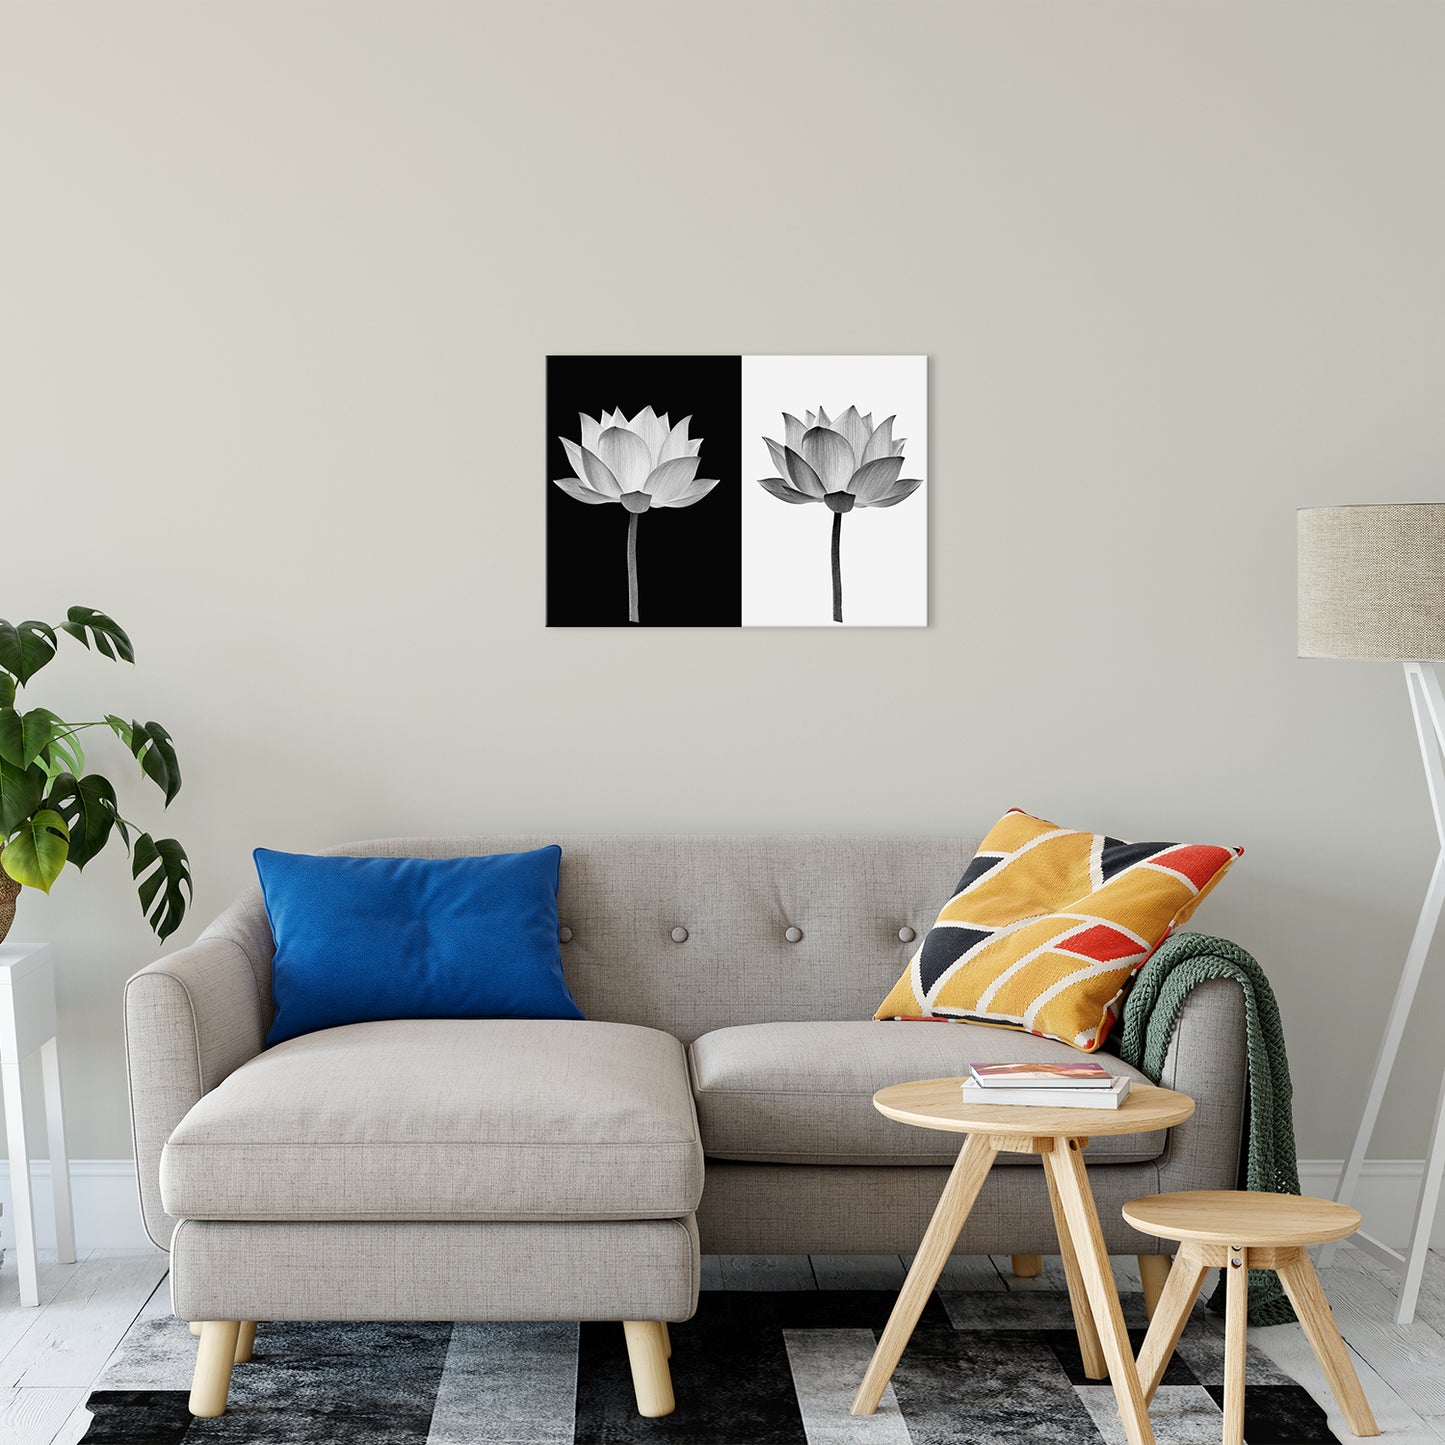 Lotus Flower on Black and White Background Floral Nature Photo Fine Art Canvas Print 20" x 30" - PIPAFINEART